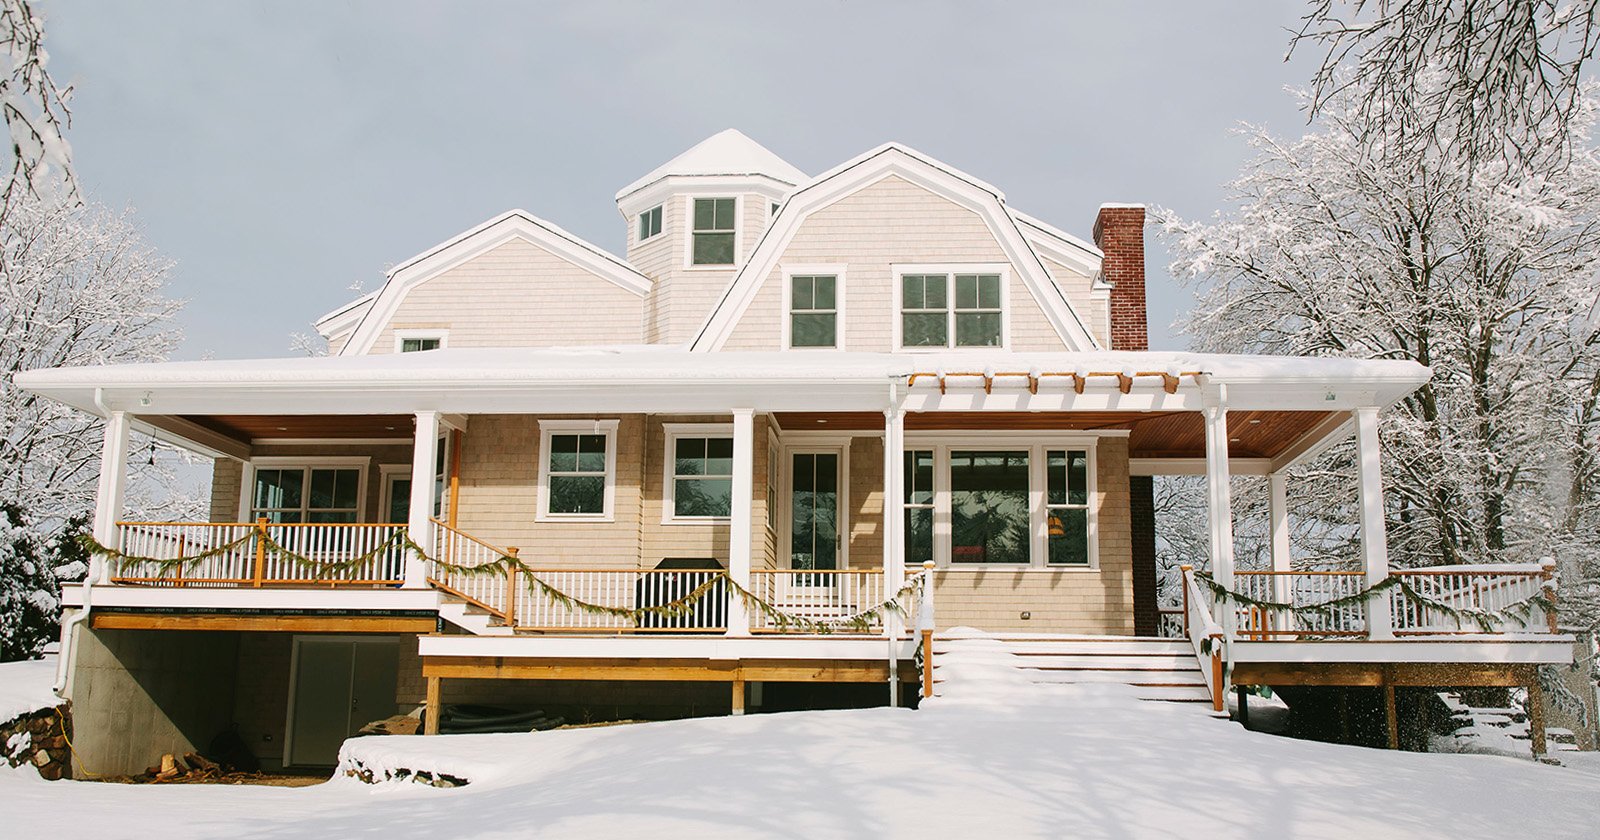 Large Home with Beige Vinyl Siding Surrounded by Snow